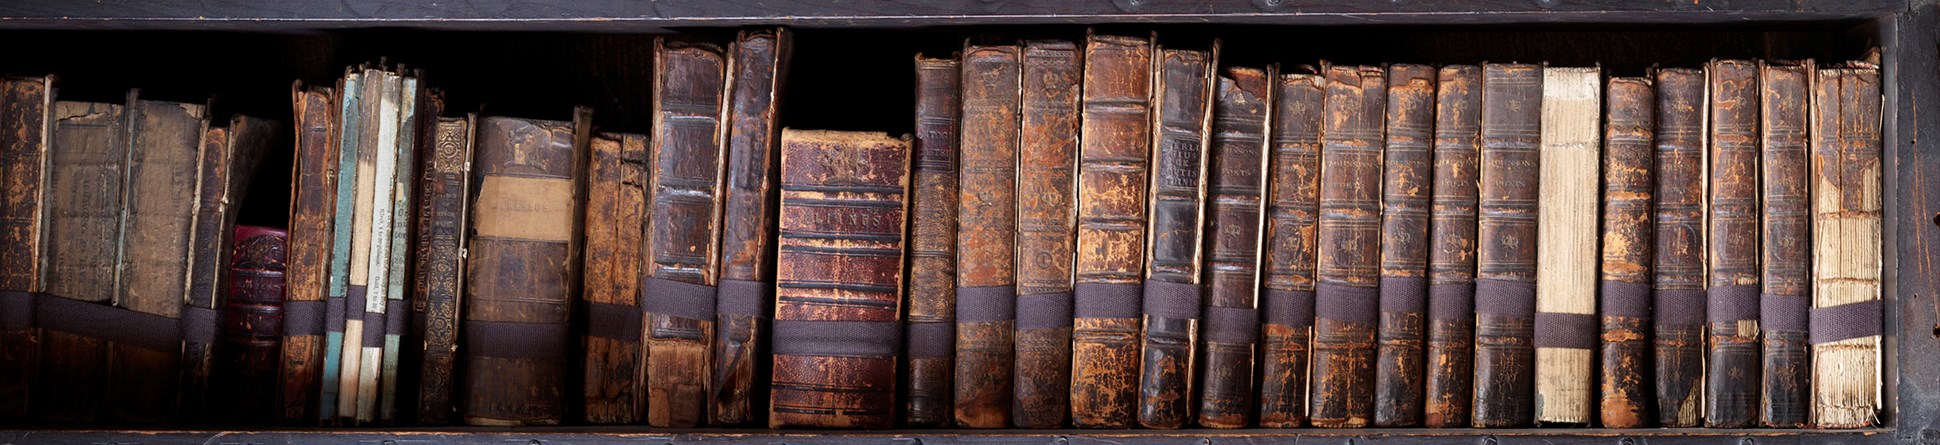 Old leather-bound books on three shelves of Chetham's Library, Long Millgate, Manchester.